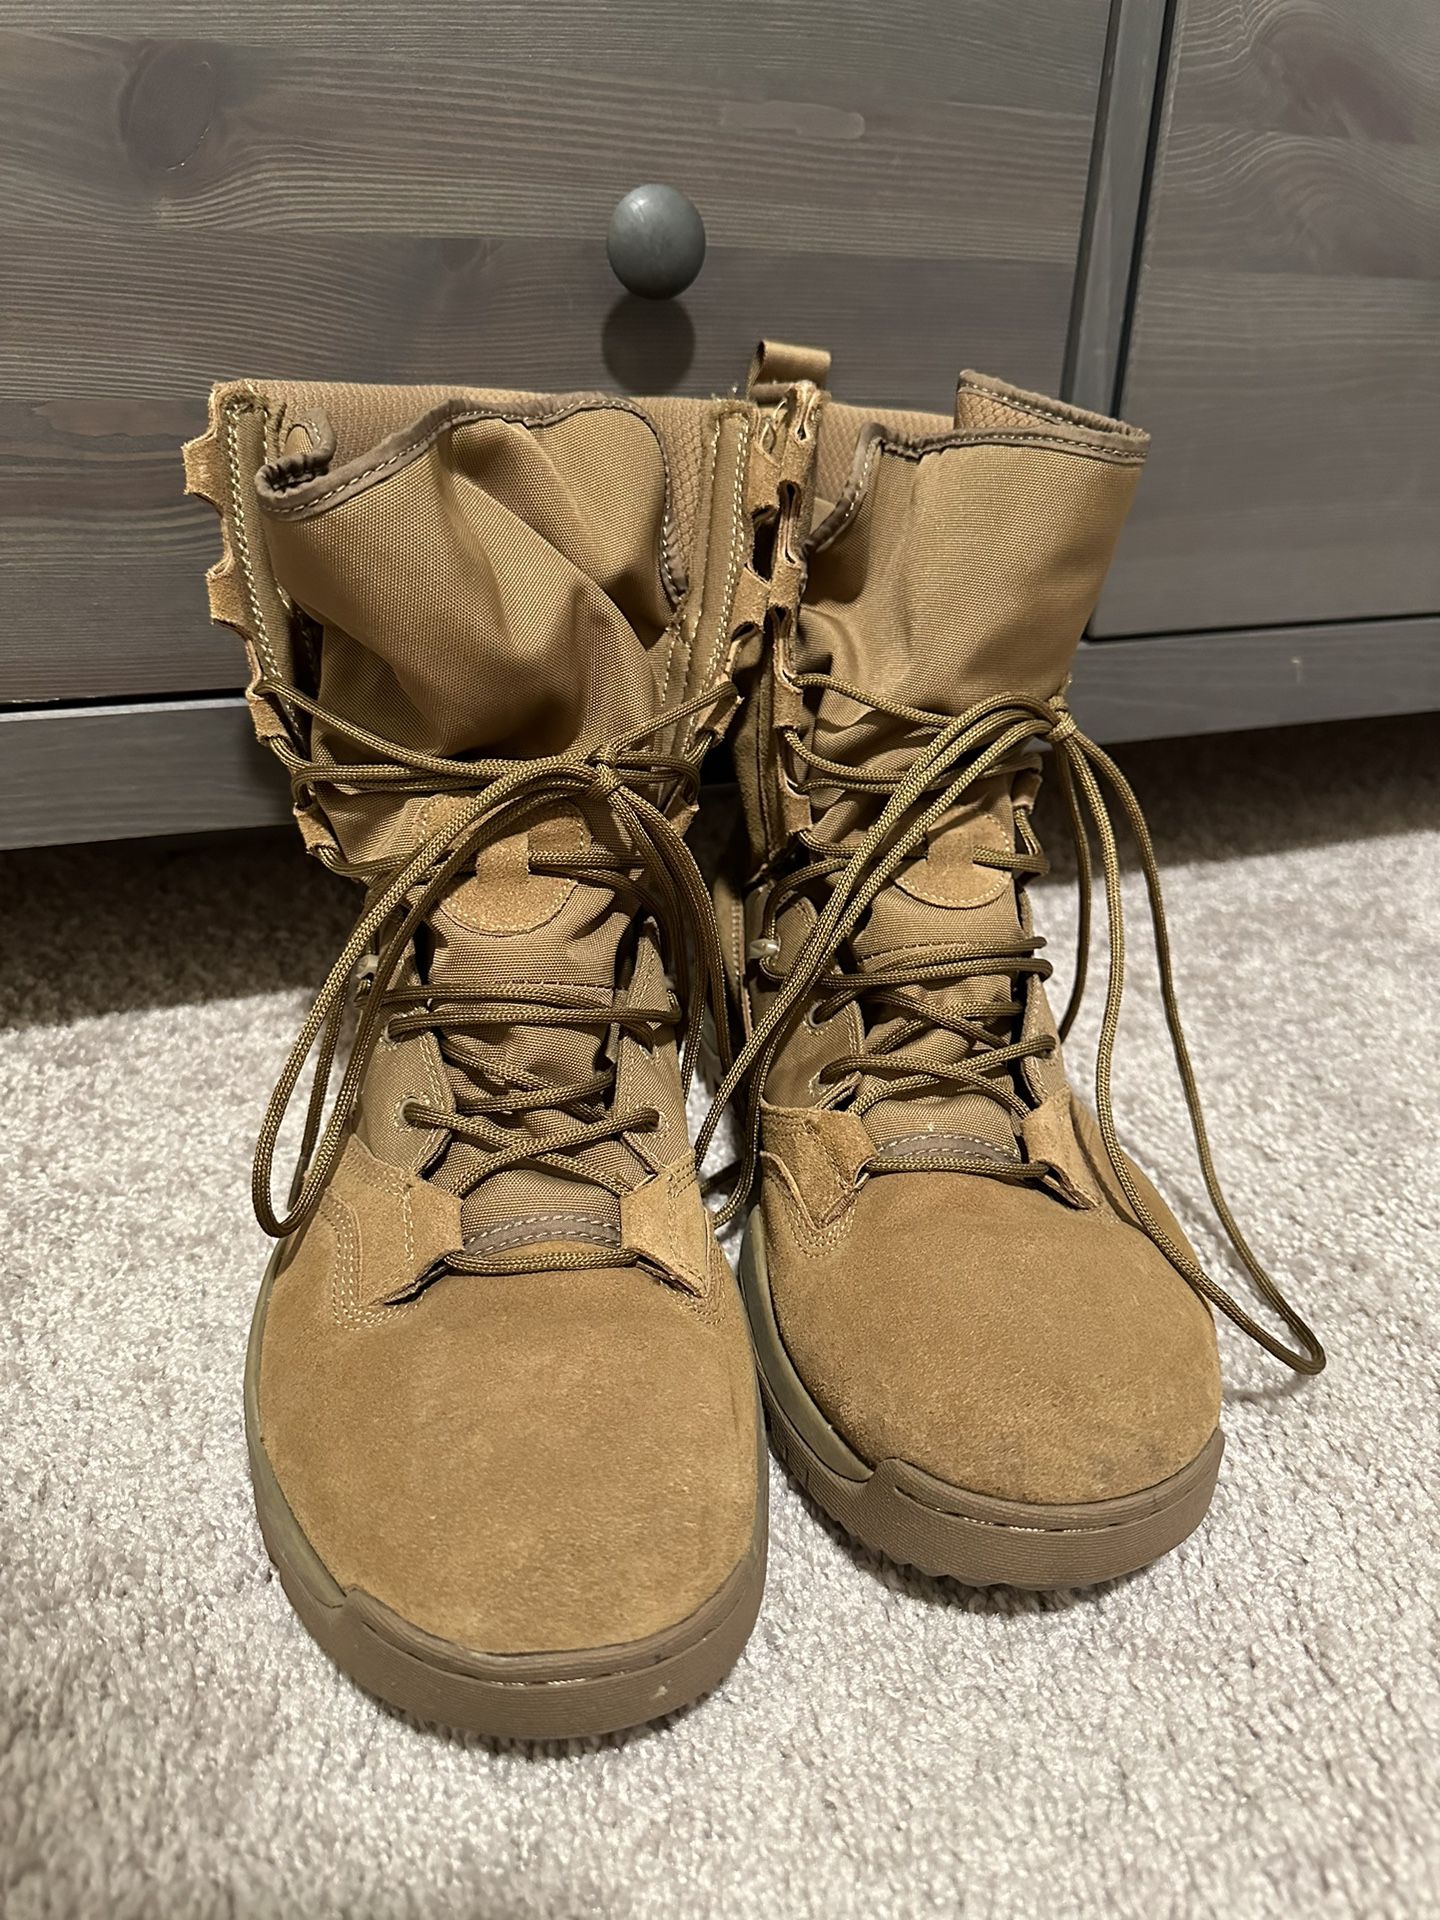 Nike Tactical Boots - Like New!